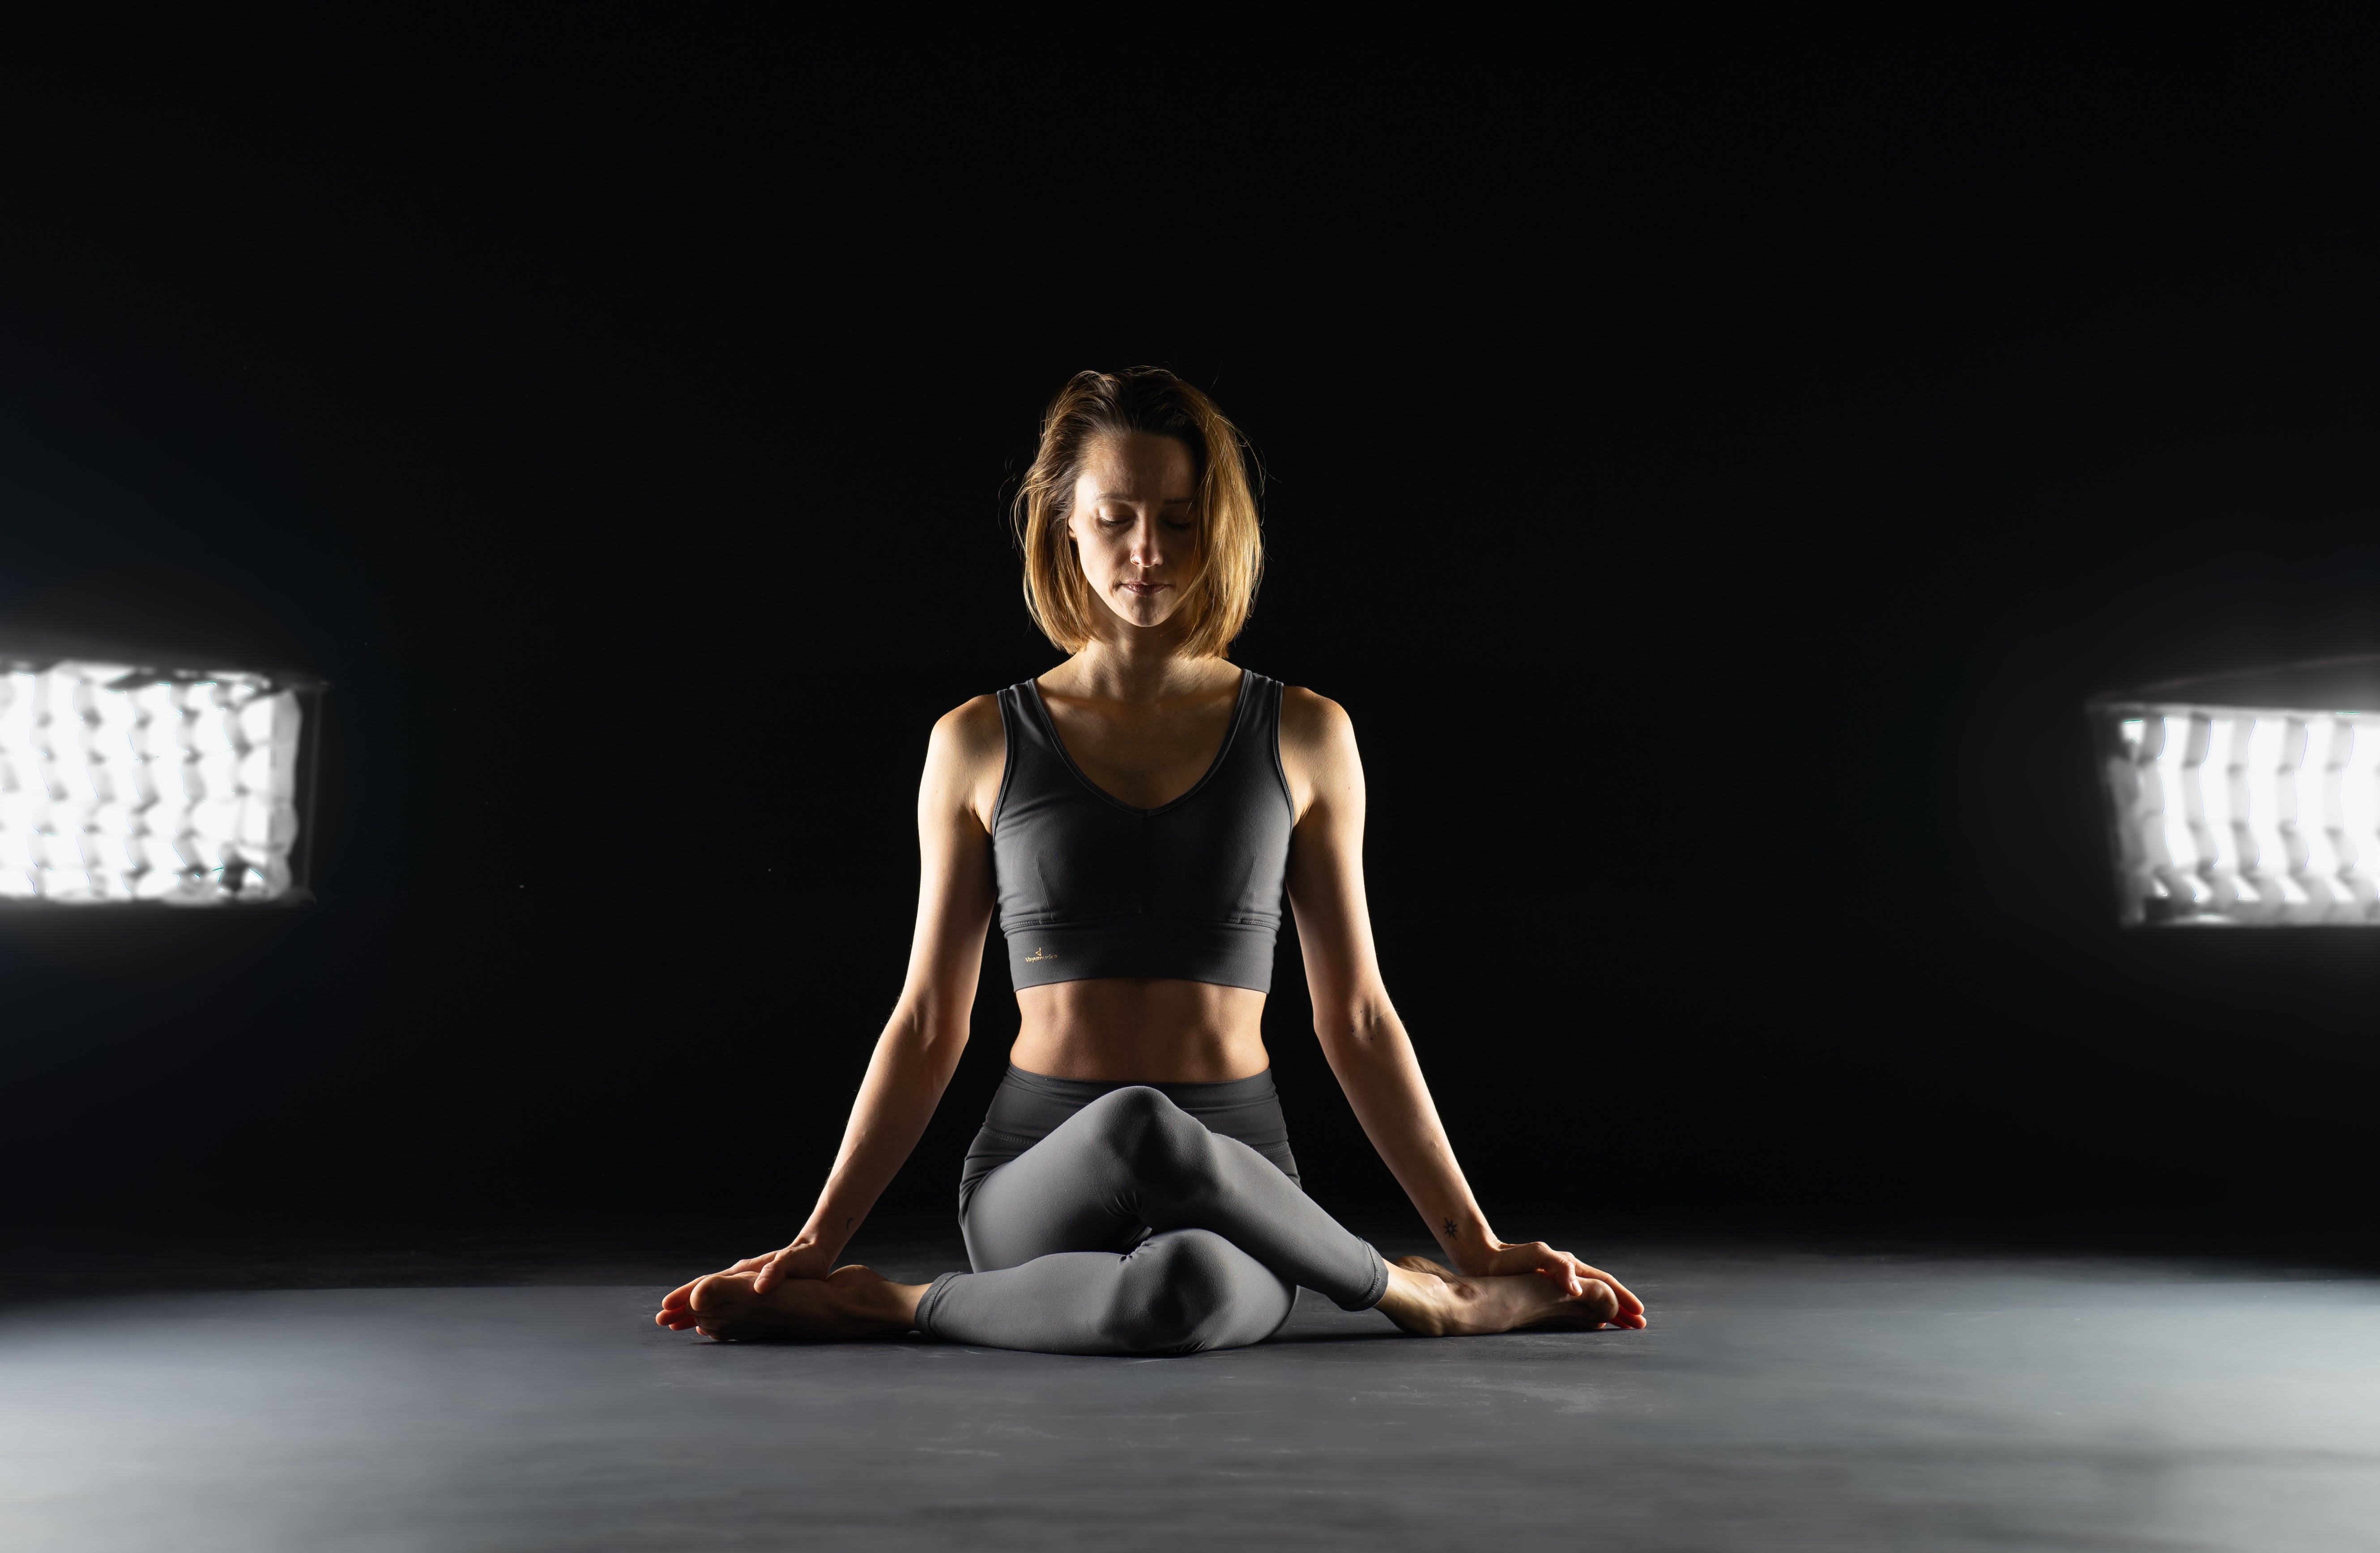 Master Stillness In Yoga - to Manage Stress and Return to Your True Self